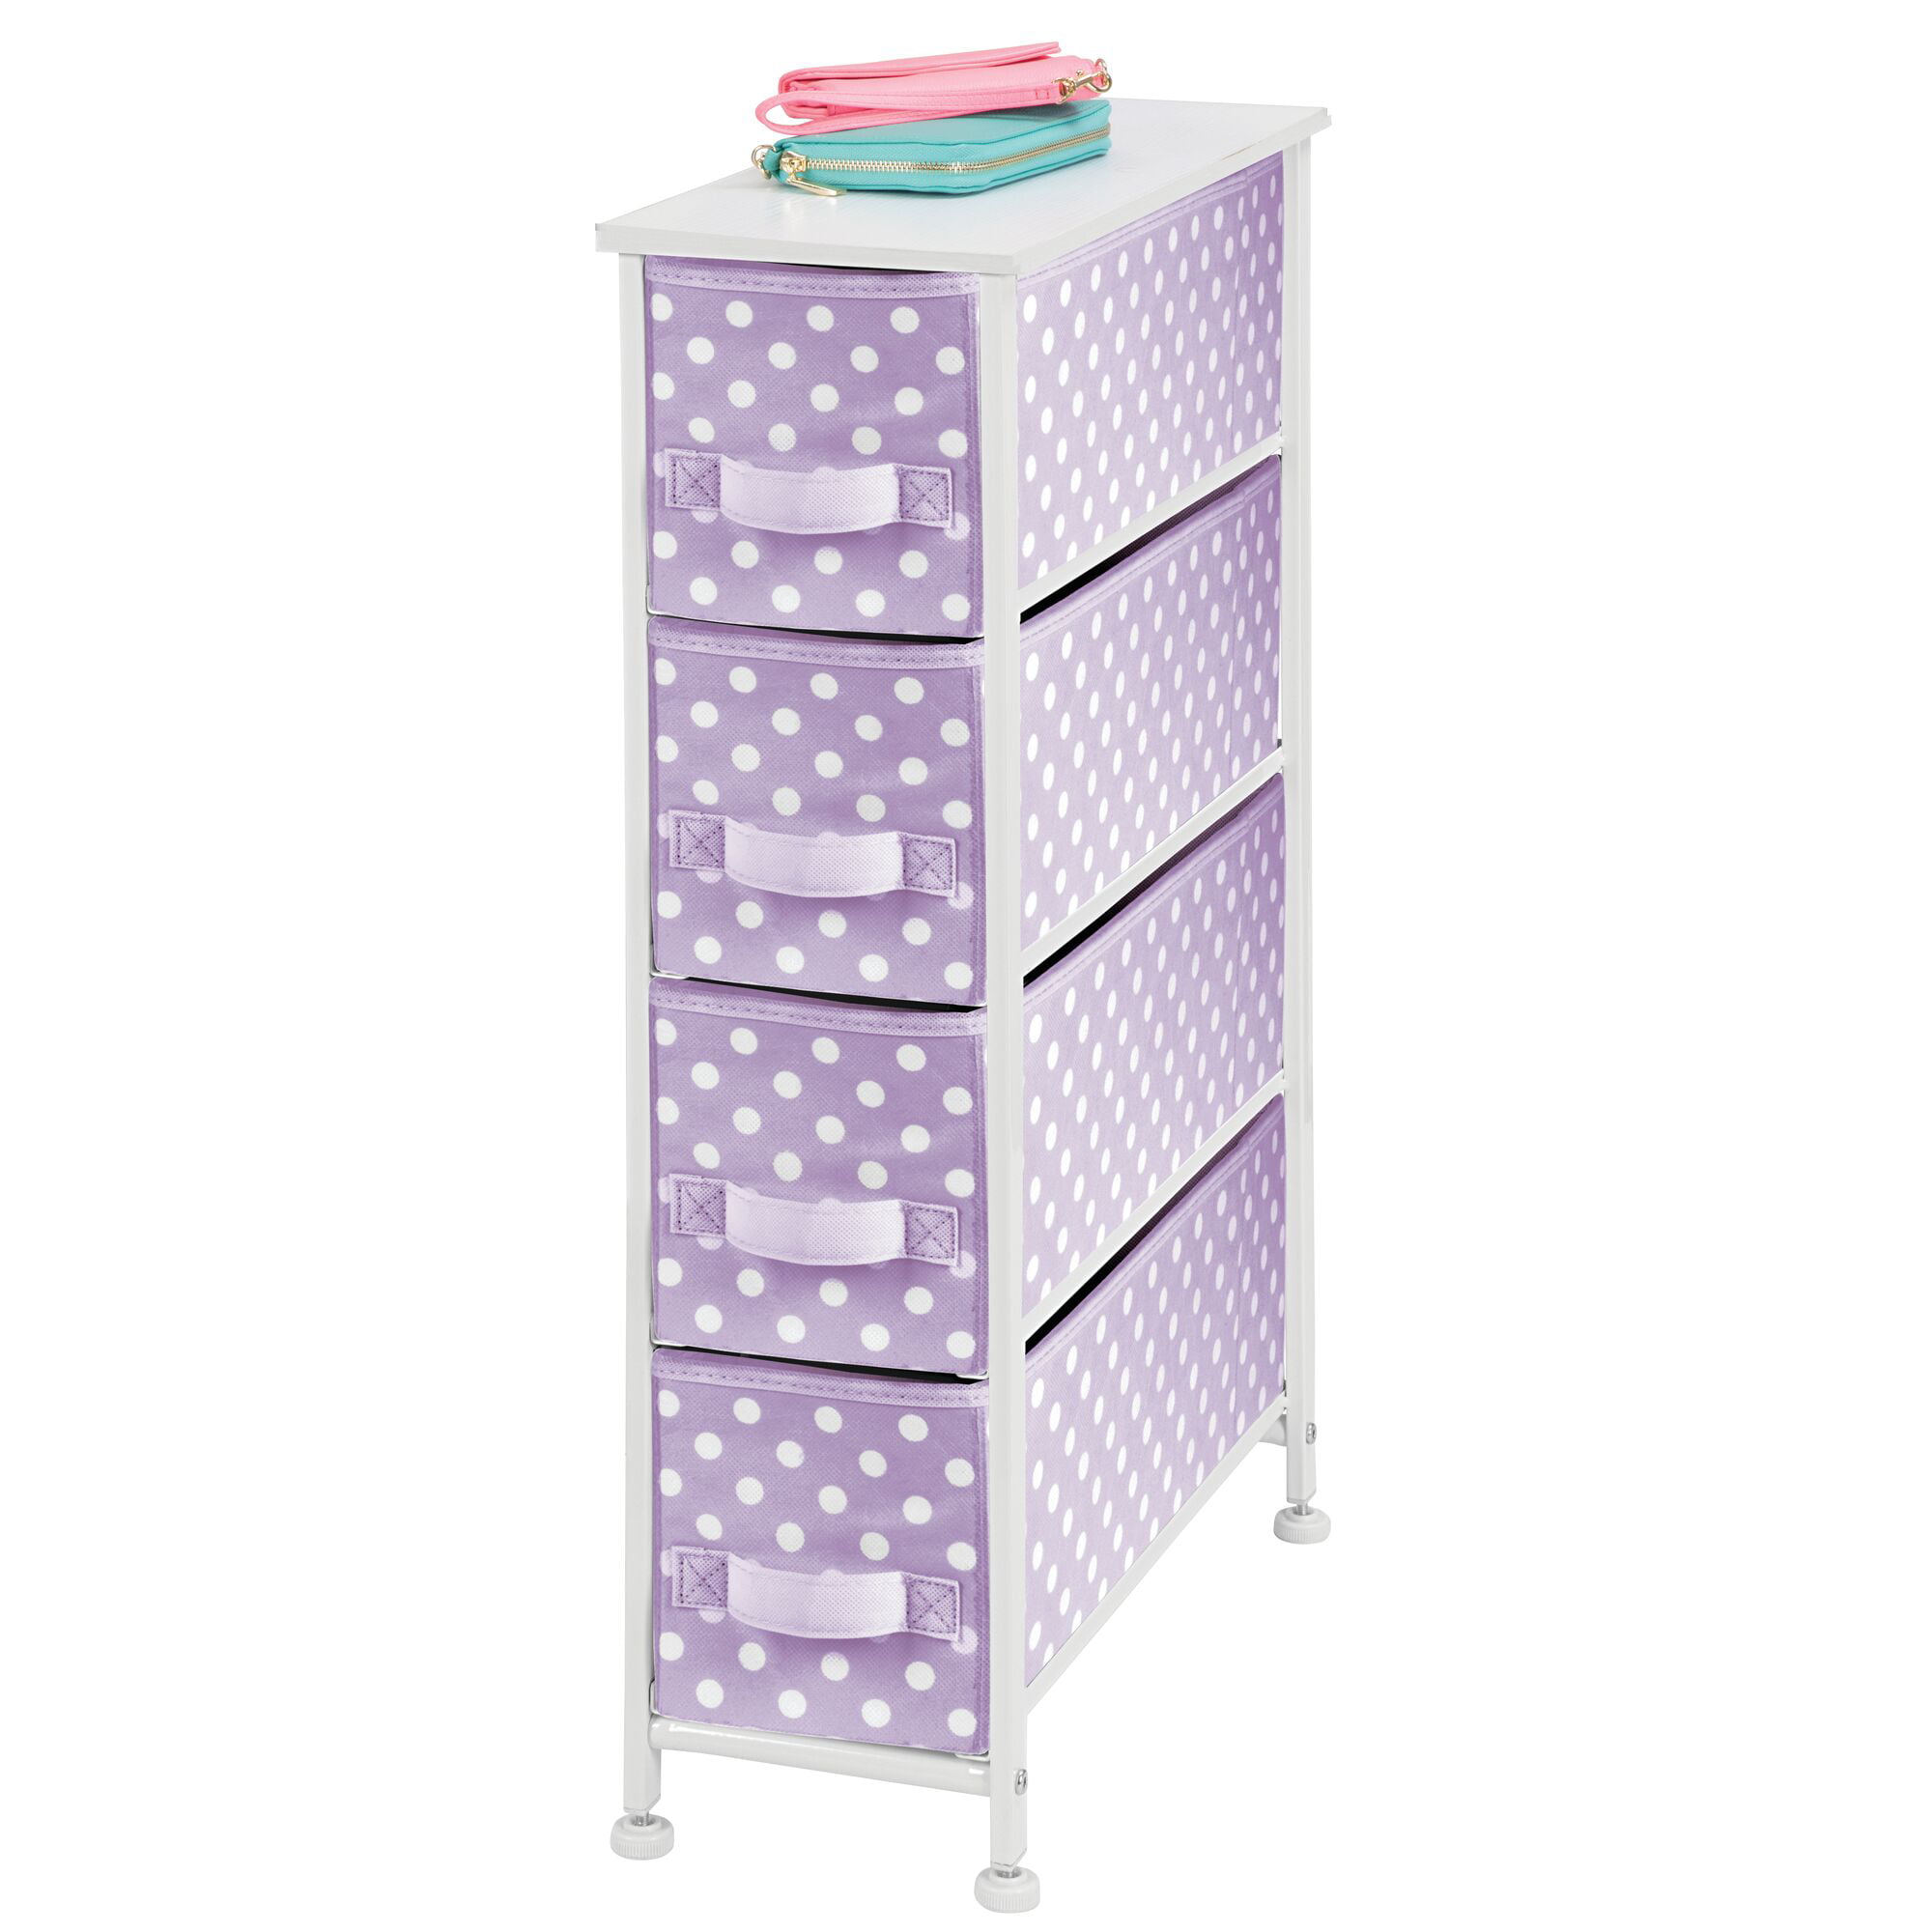 mDesign 3-Drawer Vertical Dresser Storage Tower Multi-Bin Organizer Unit for Child/Kids Bedroom or Nursery Light Pink/White Wood Top and Easy Pull Fabric Bins Sturdy Steel Frame 